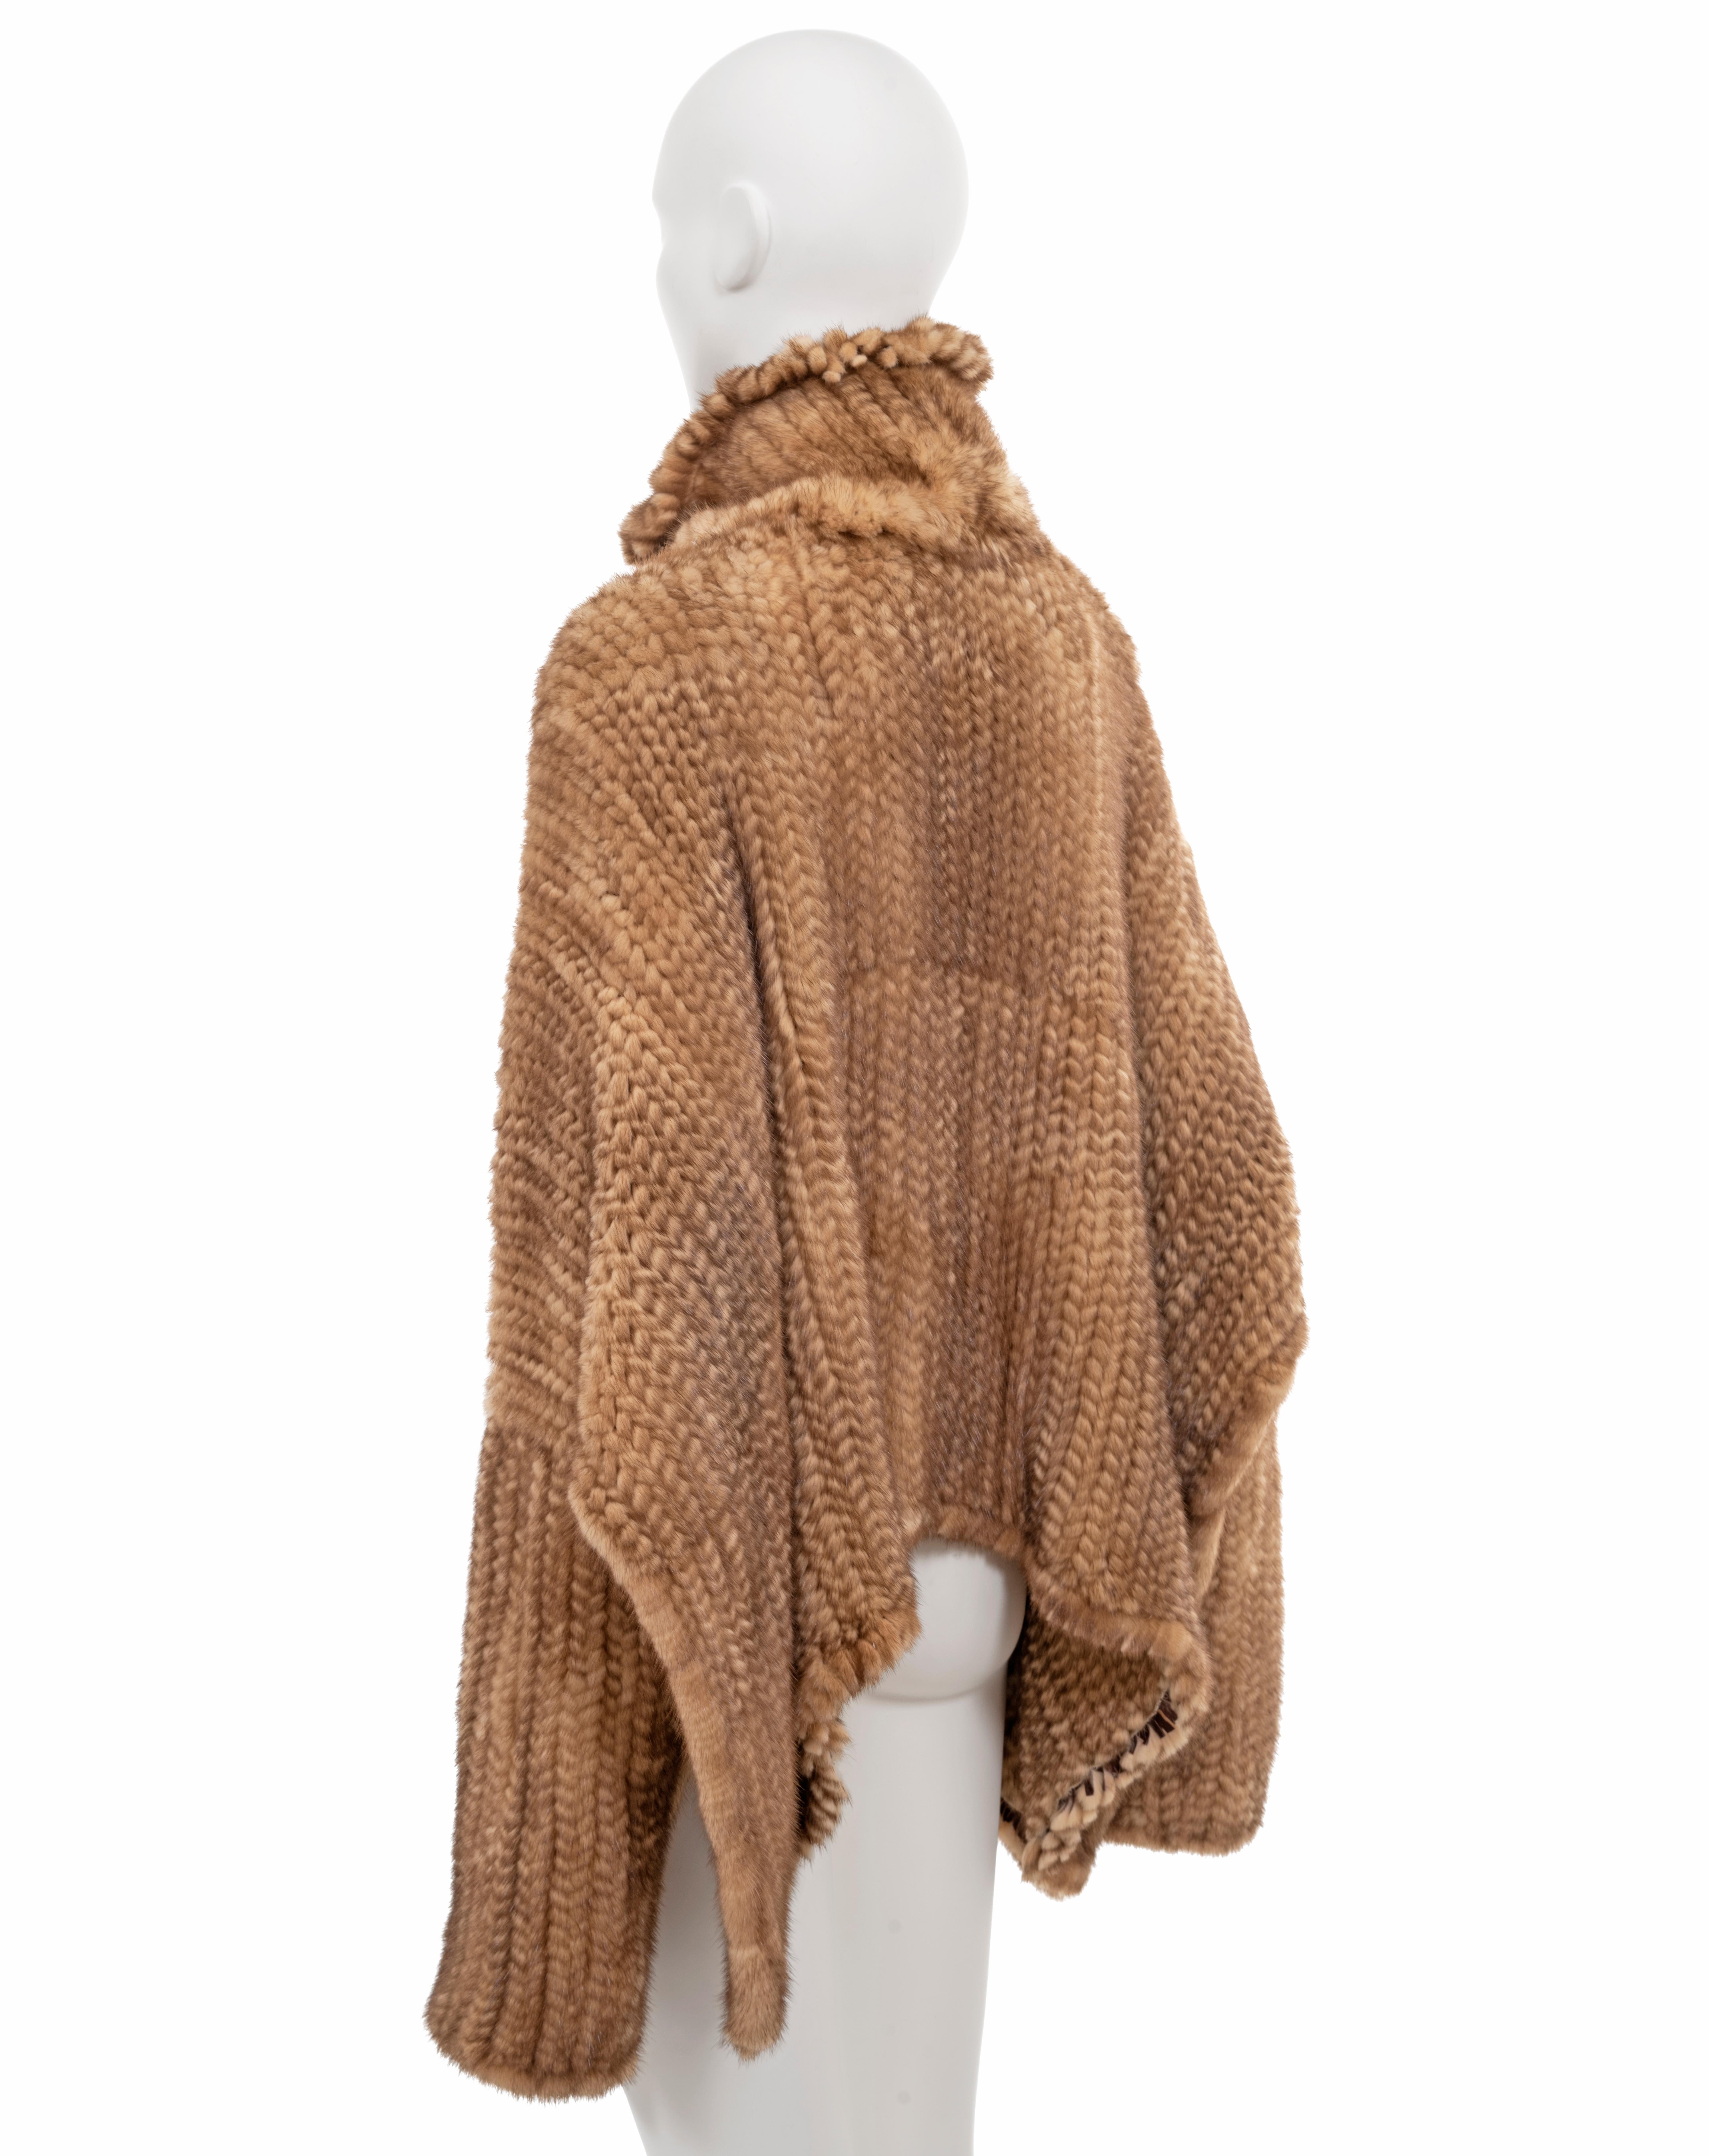 Christian Dior by John Galliano knitted mink fur oversized sweater, fw 2000 For Sale 2